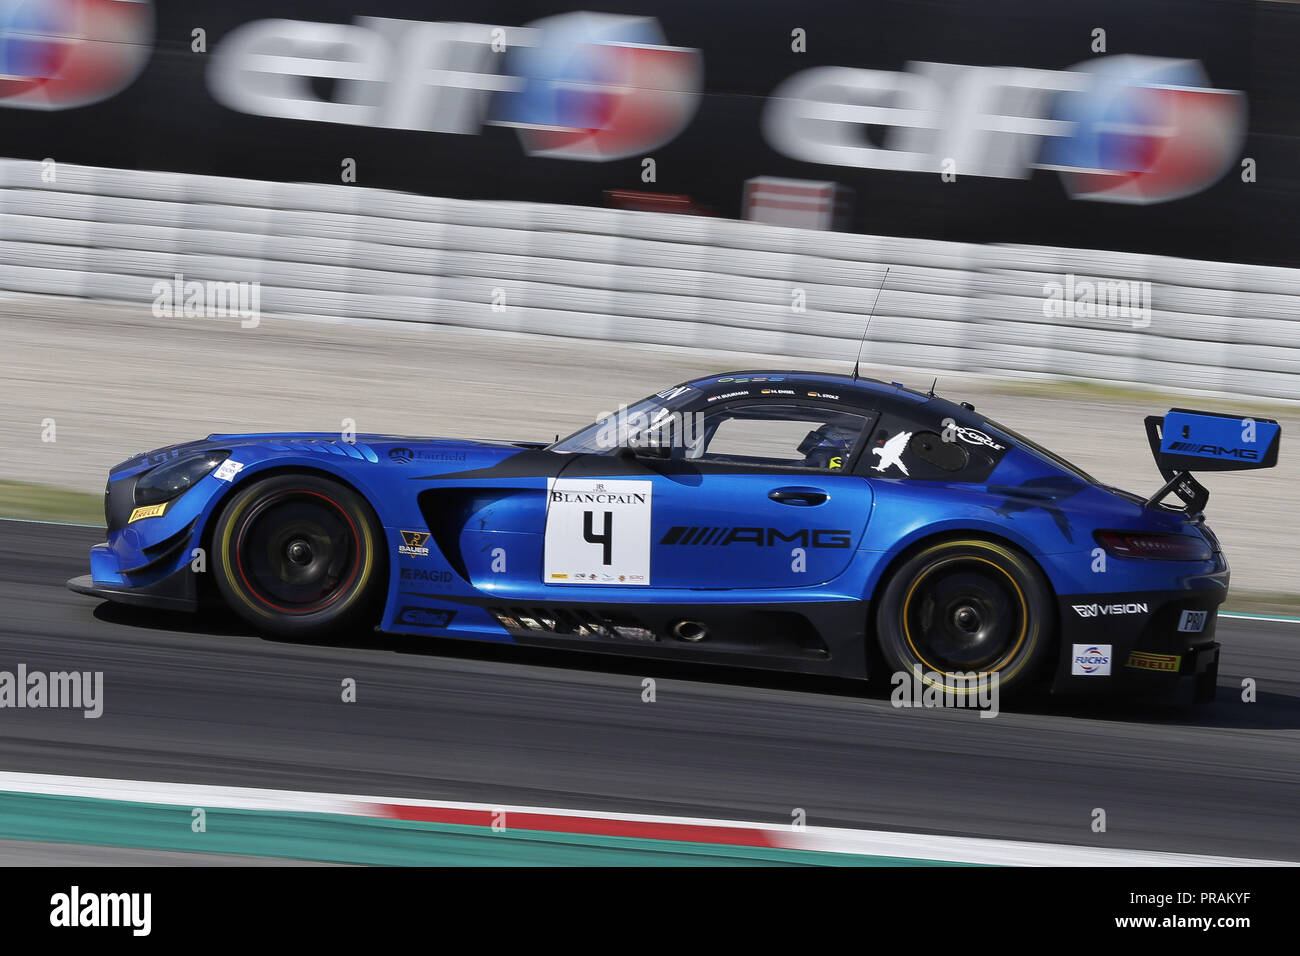 Barcelona, Spain. 30 September 2018. Blancpain GT Endurance Series; 04 ENGEL Maro, (deu), Black Mercedes-AMG GT3, seen during the race. Credit: Eric Alonso/SOPA Images/ZUMA Wire/Alamy Live News Stock Photo - Alamy